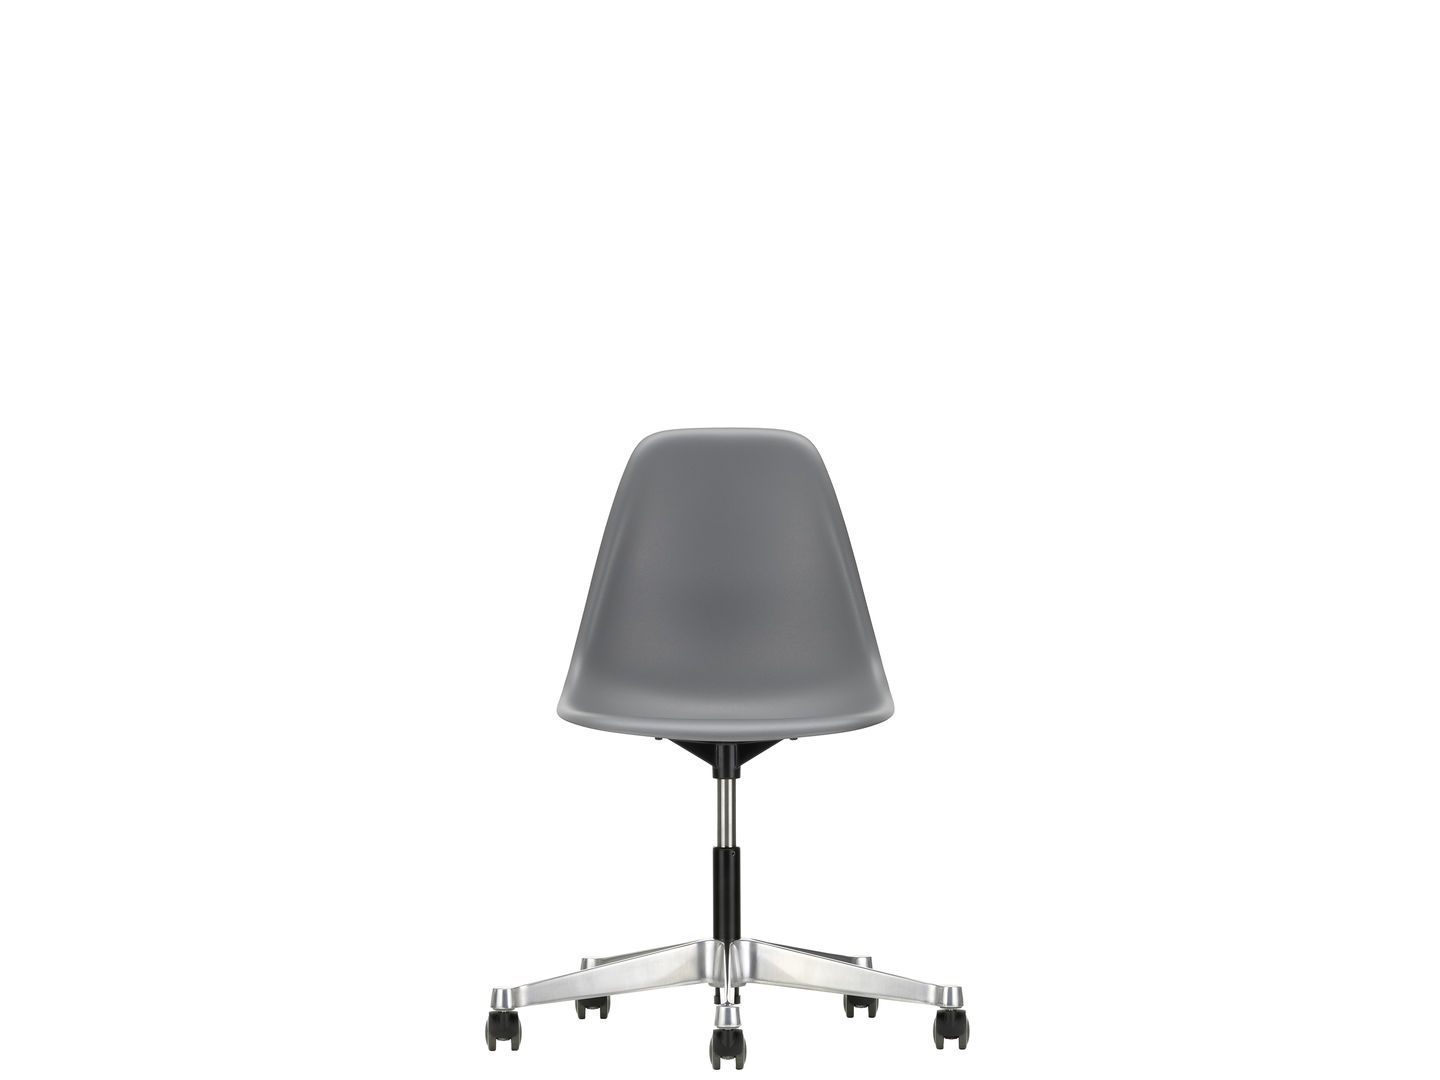 Eames Plastic Side Chair PSCC | One52 Furniture 